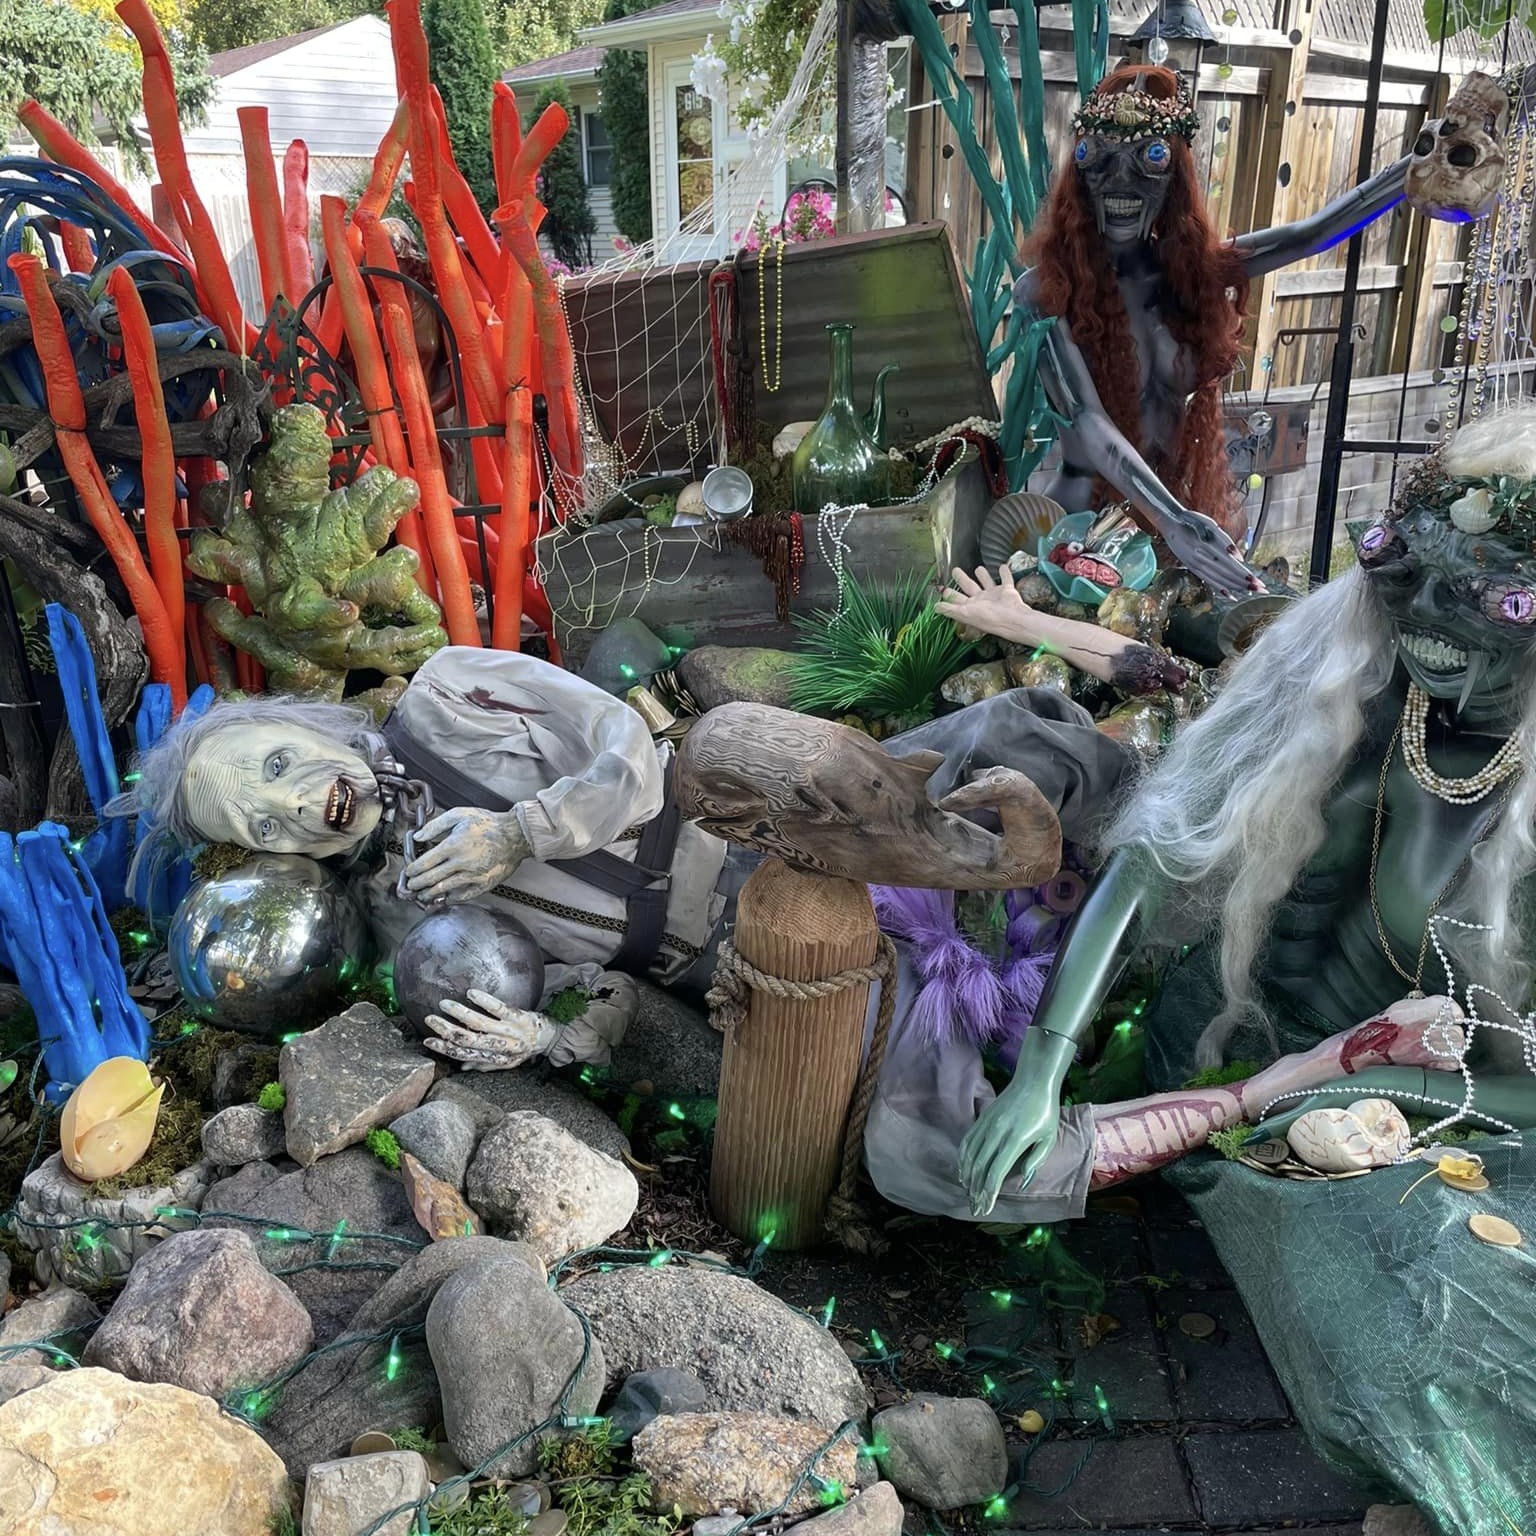 Halloween decorations depicting mermaids, their victim, a treasure chest, and a seascape.